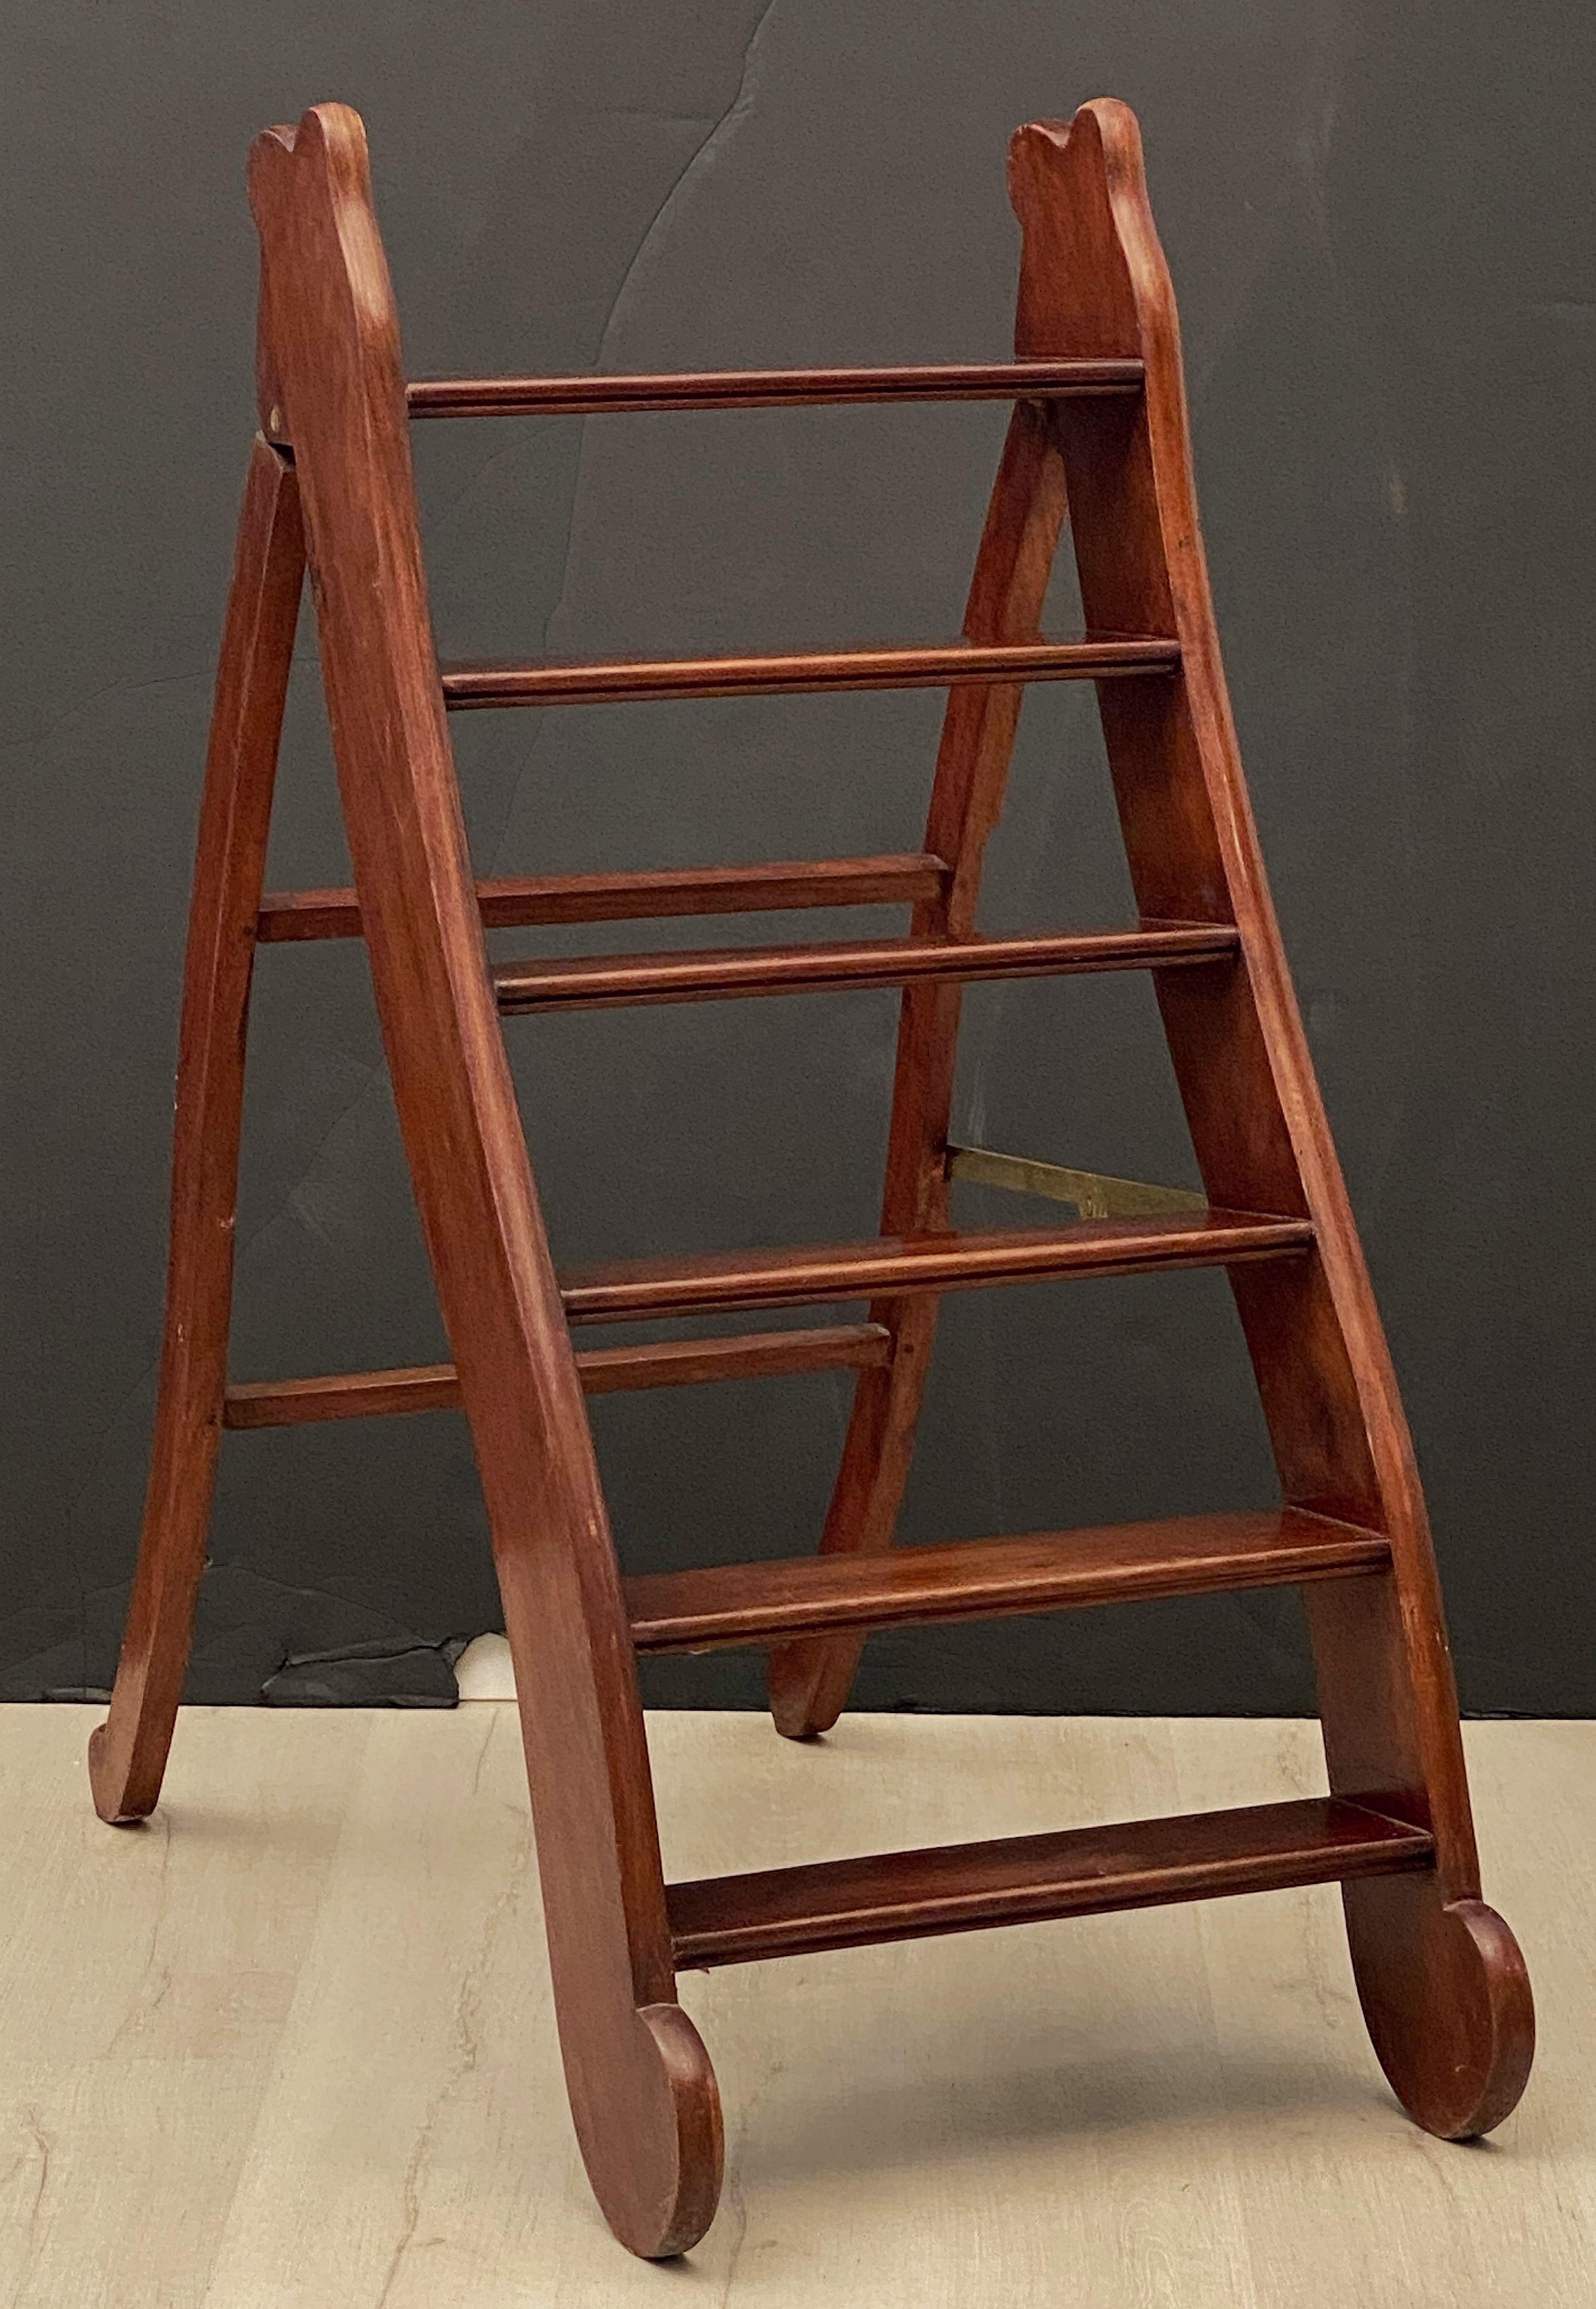 20th Century English Folding Library Step Ladder of Mahogany and Brass from the Edwardian Era